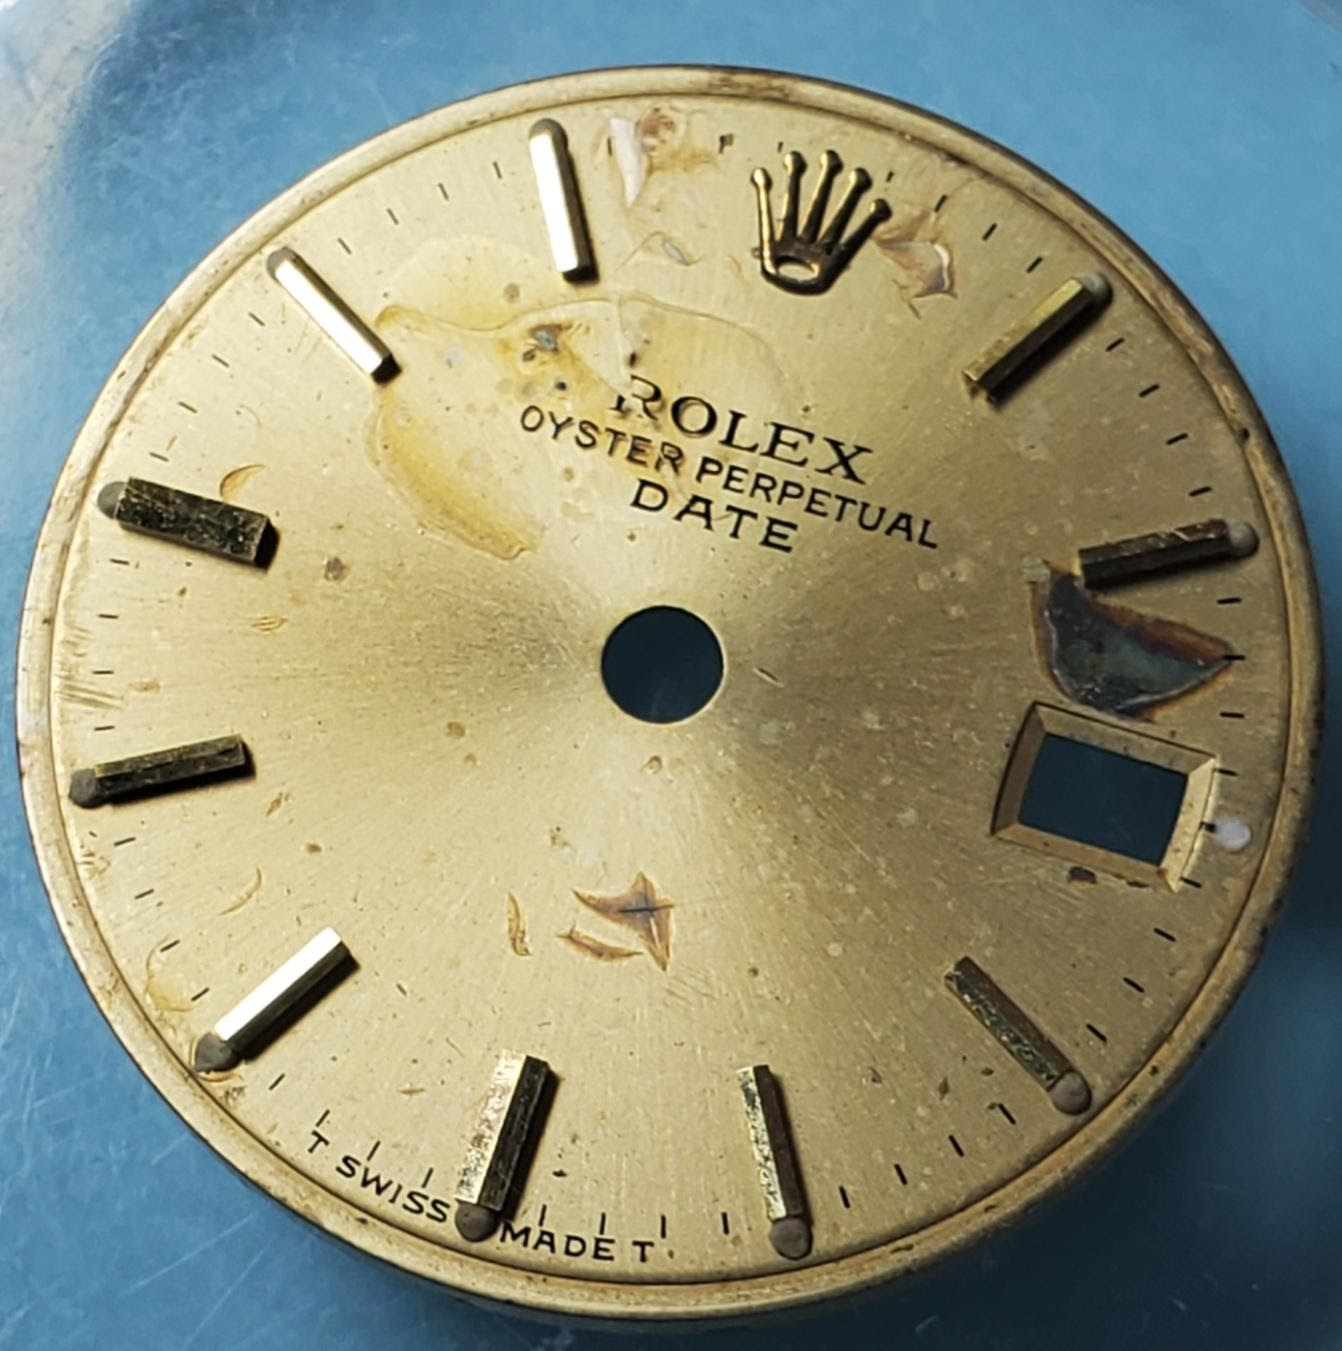 Rolex, Cartier, Patek Philippe, Audemars Piguet, Vacheron Constantin and all high end luxury Swiss timepieces and improve their look with a dial refinishing.